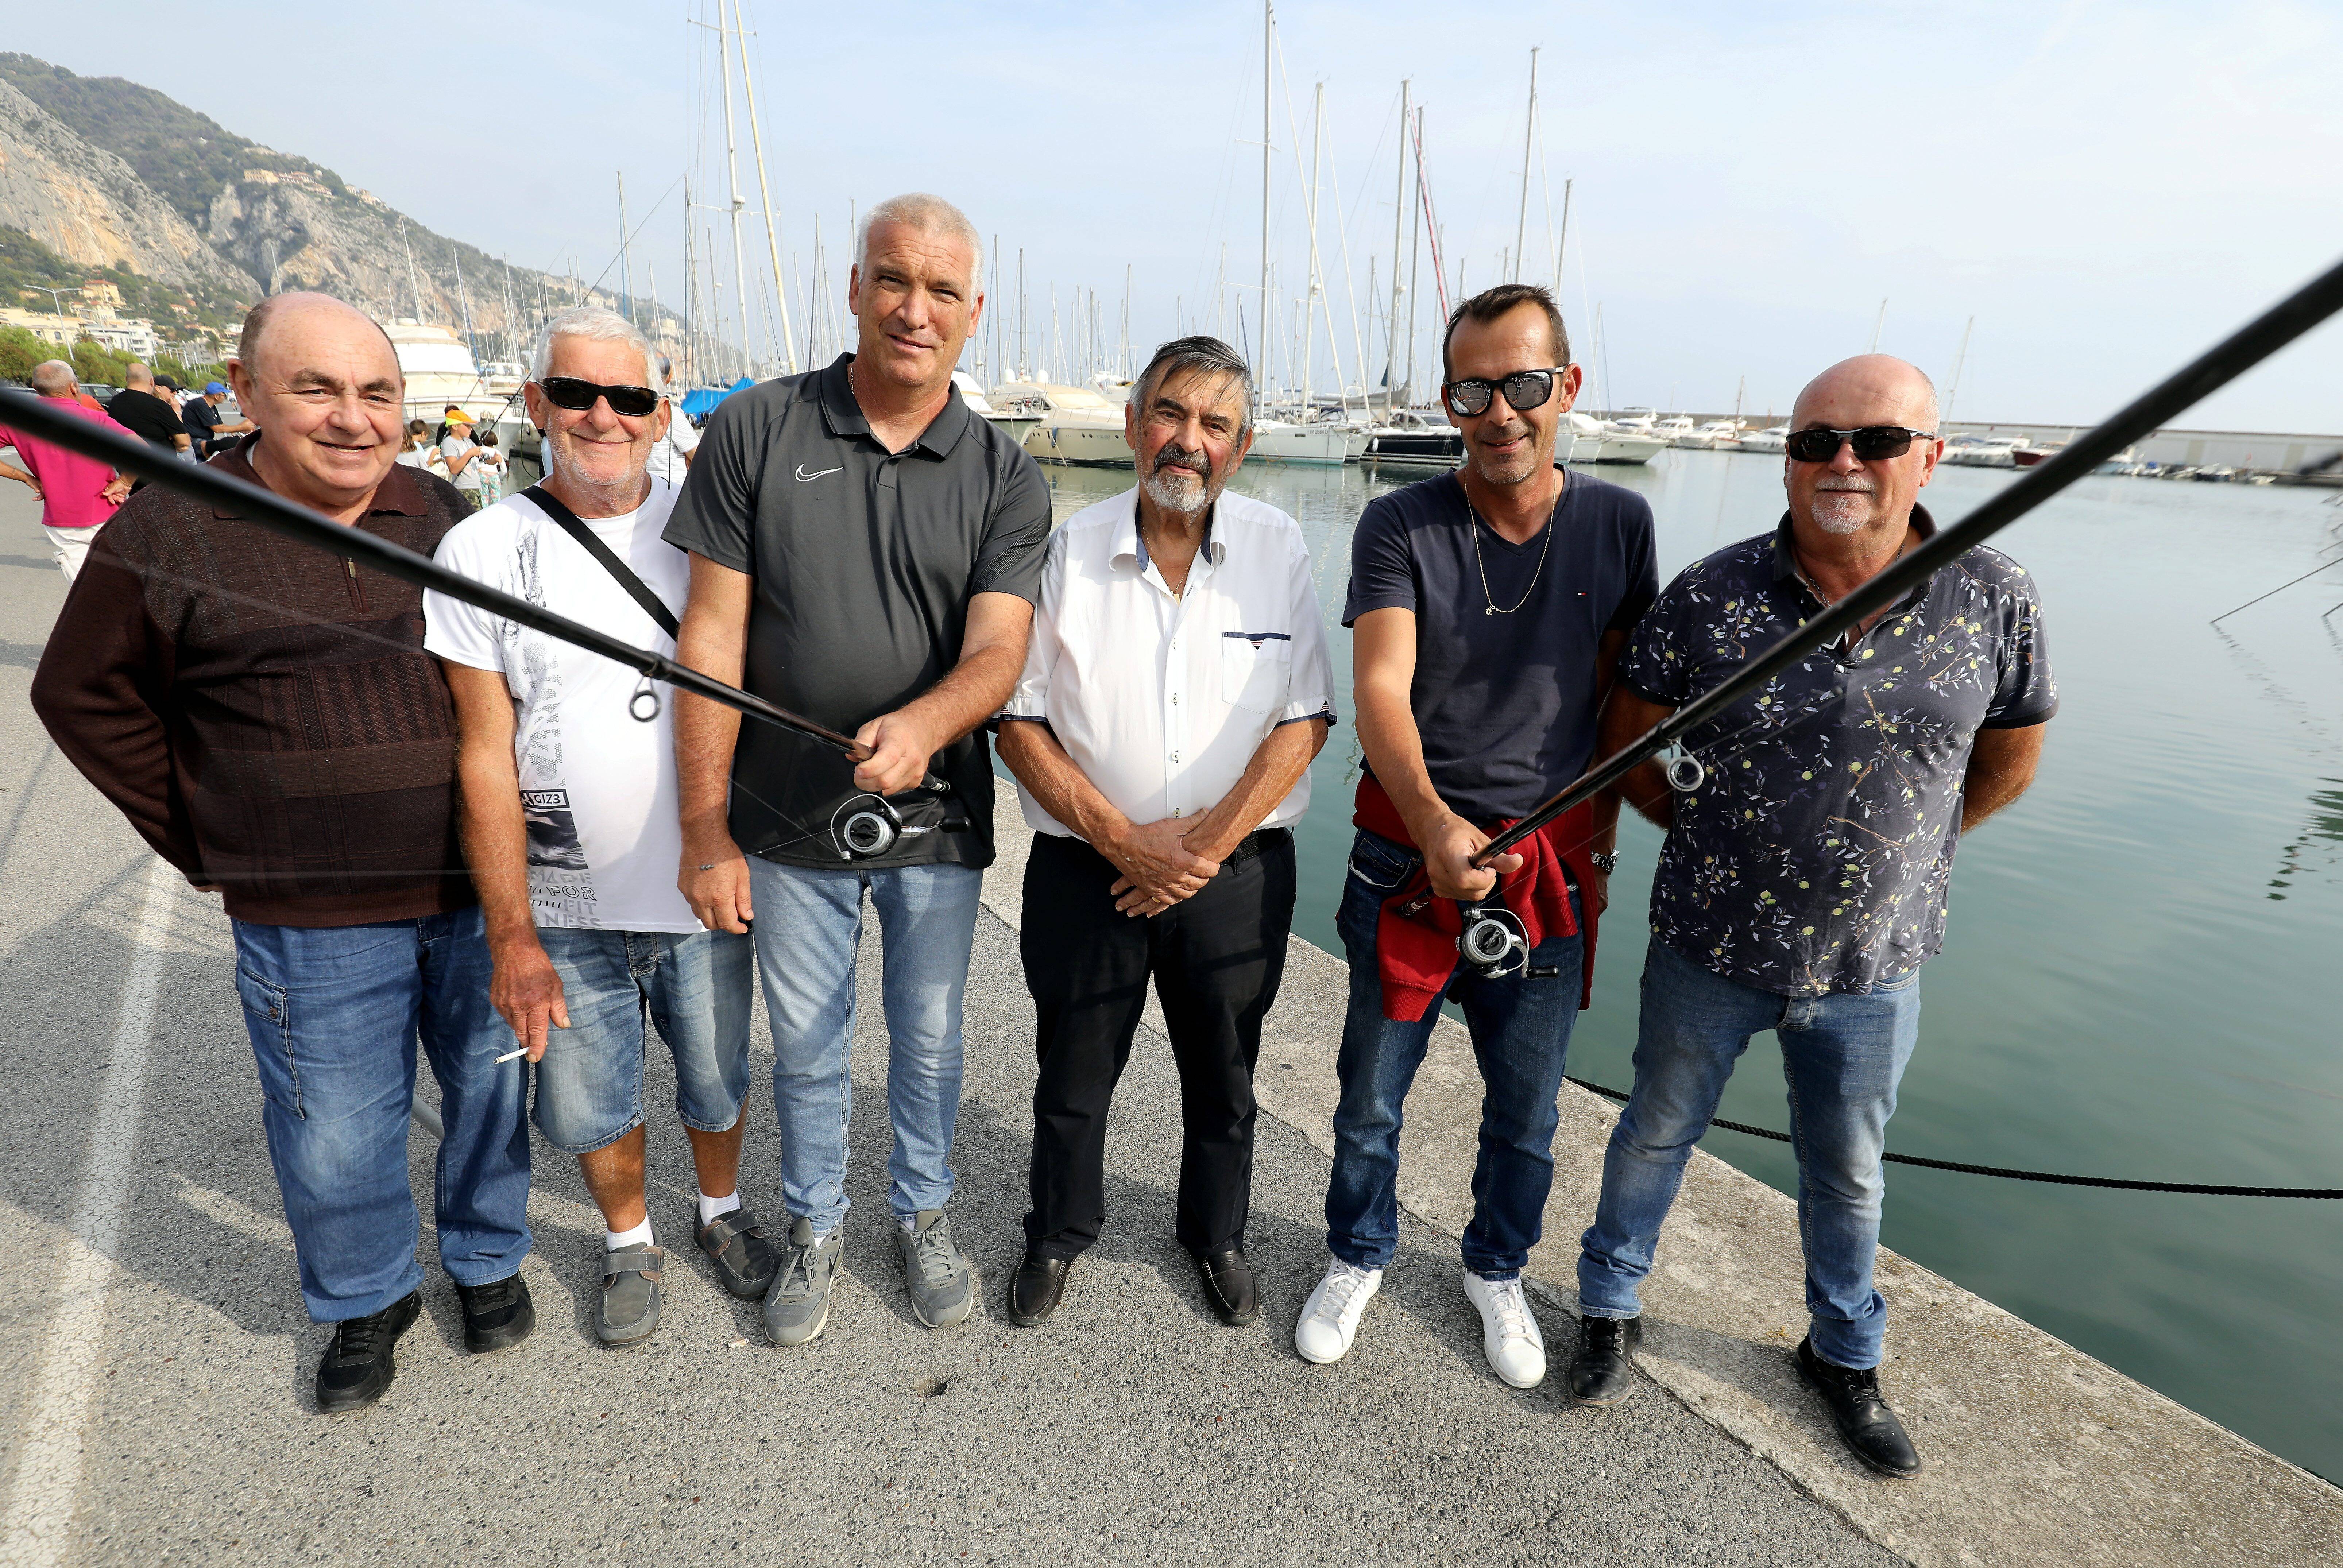 These Mentonnais are going to Portugal to participate in the European Floating Fishing Championship